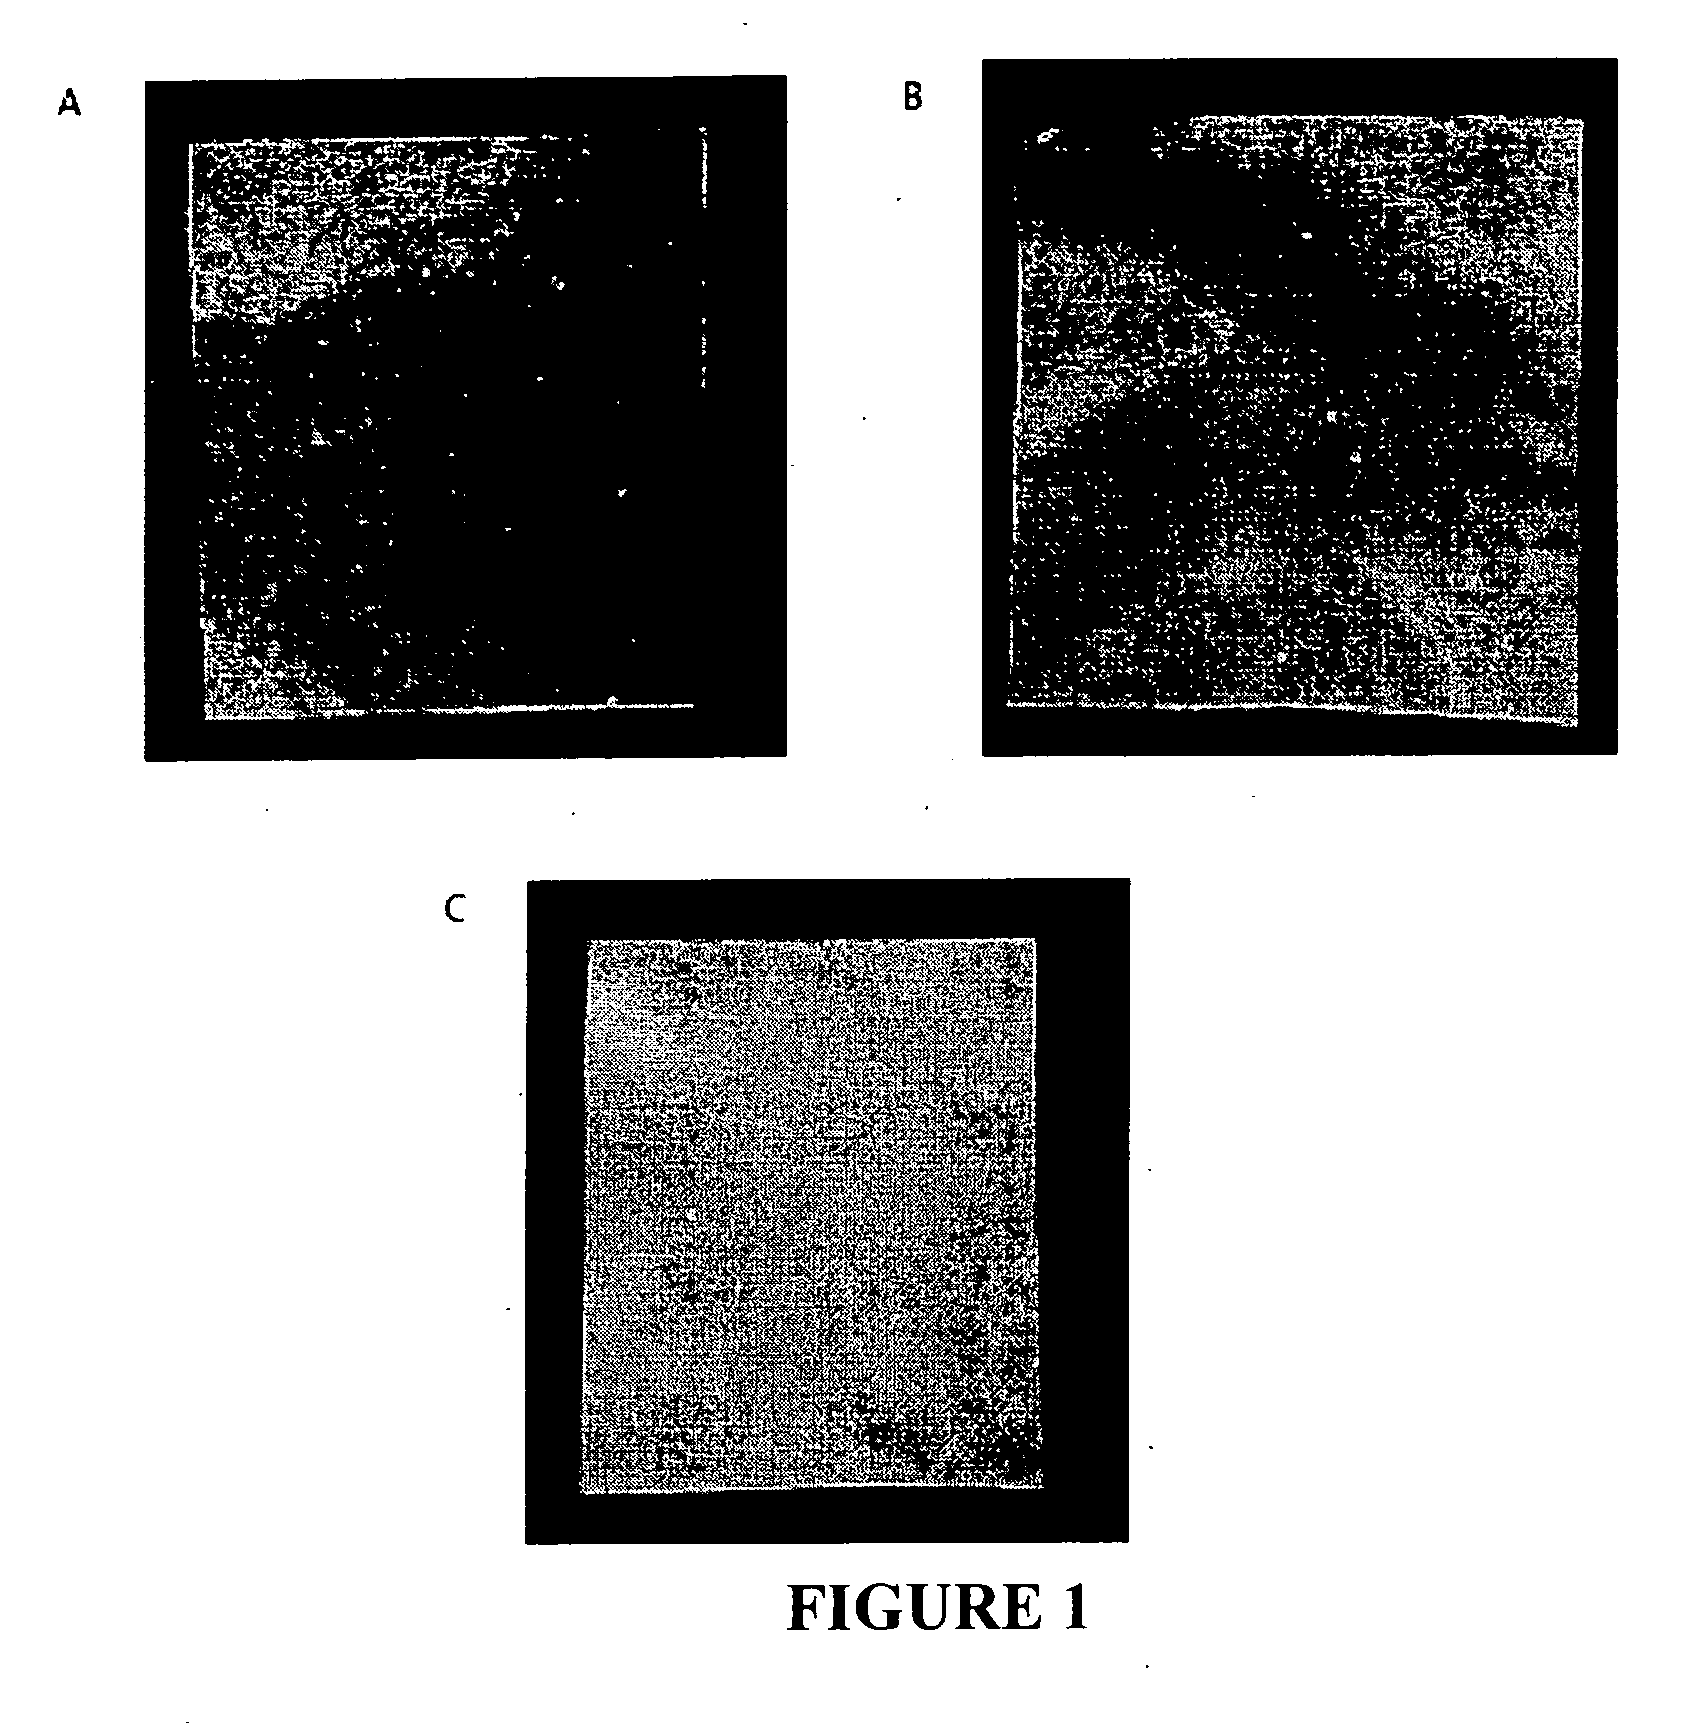 Method for producing cross-linked hyaluronic acid-protein bio-composites